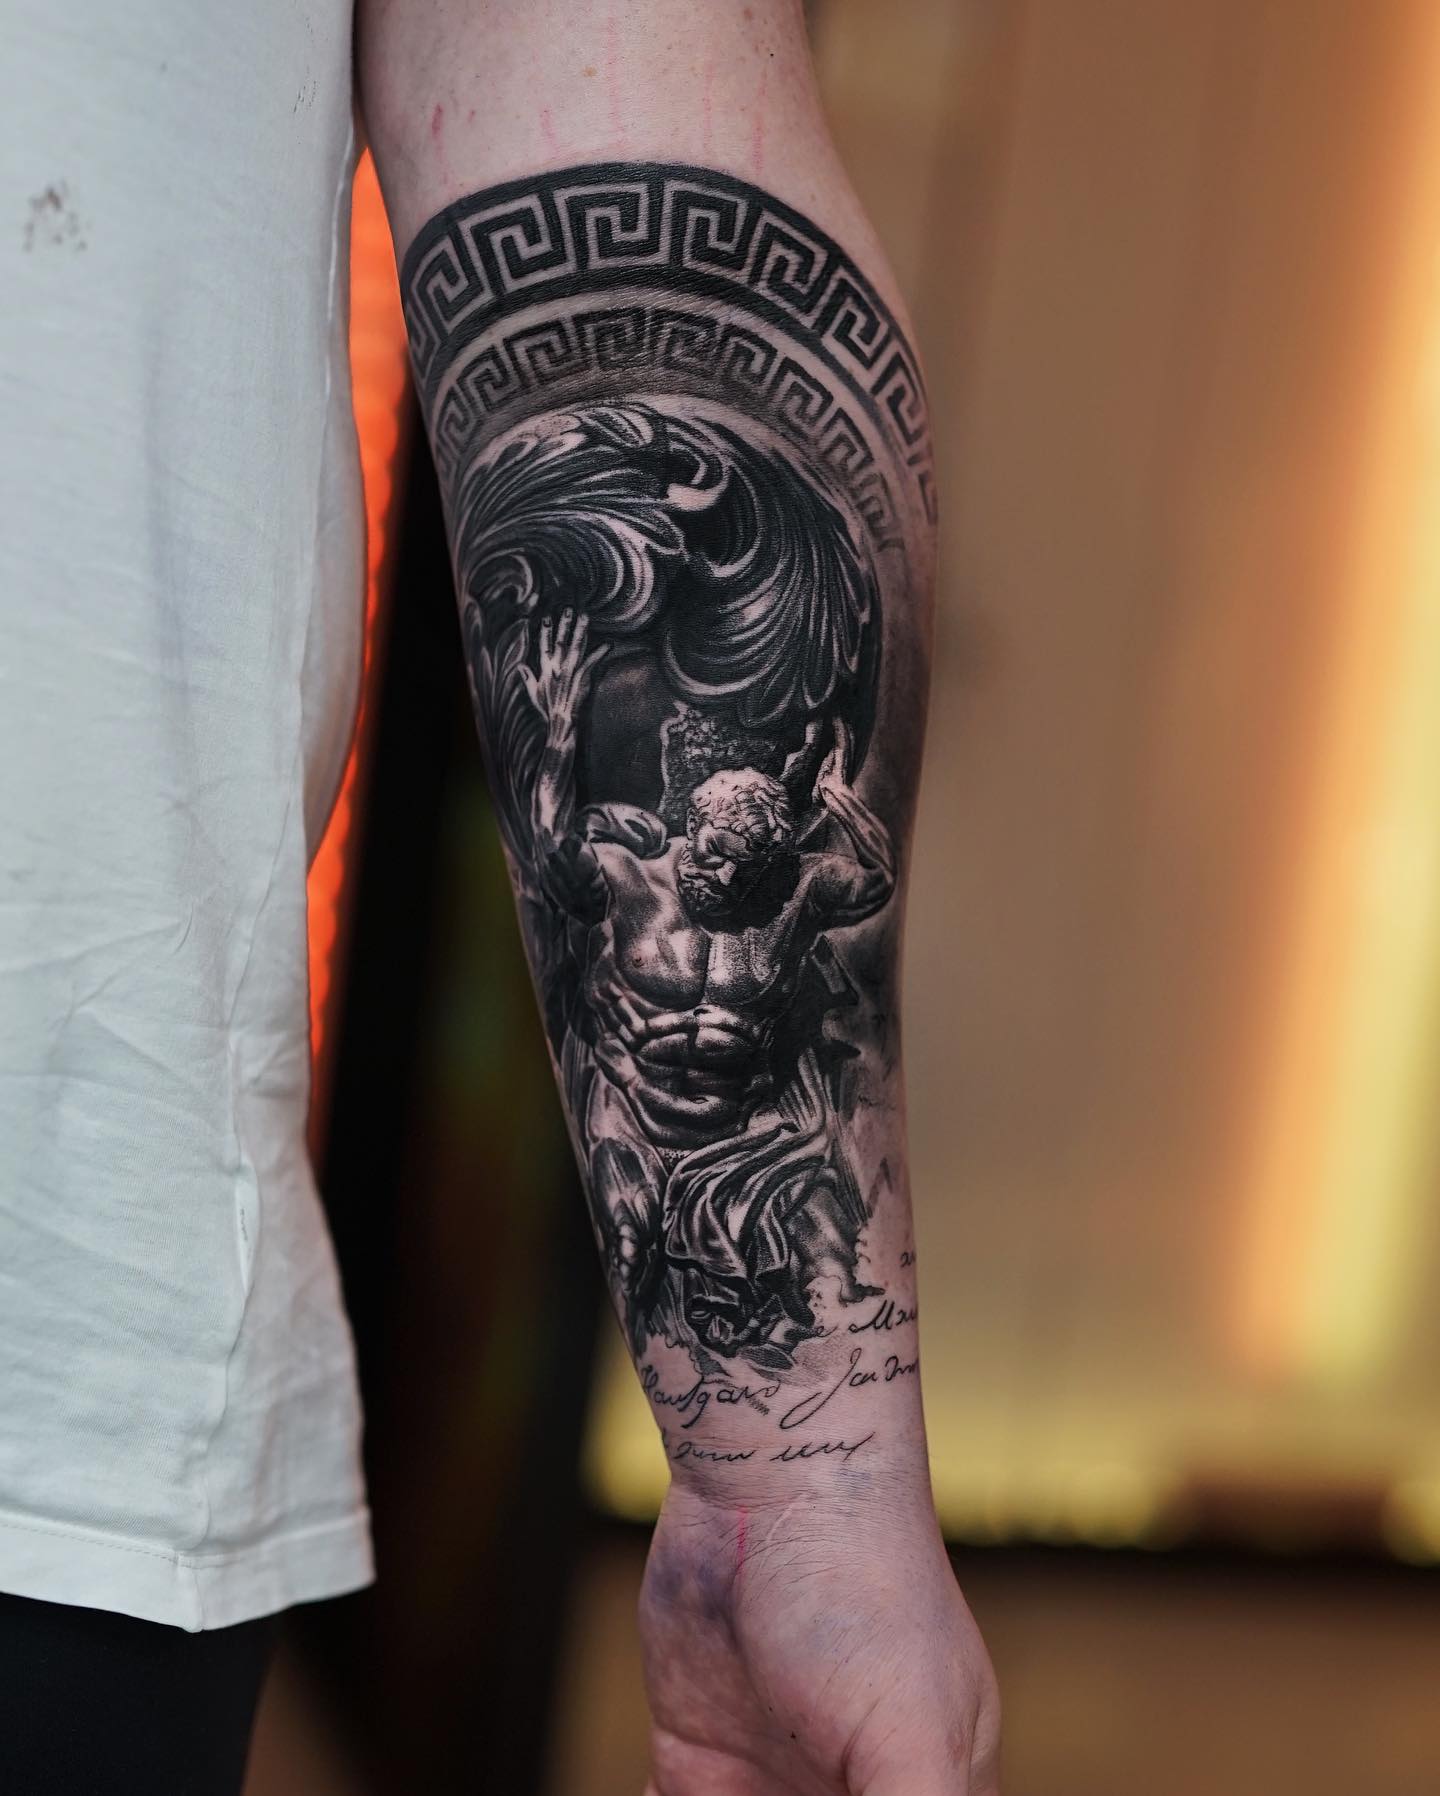 30 Best Athena Tattoo Ideas - Read This First